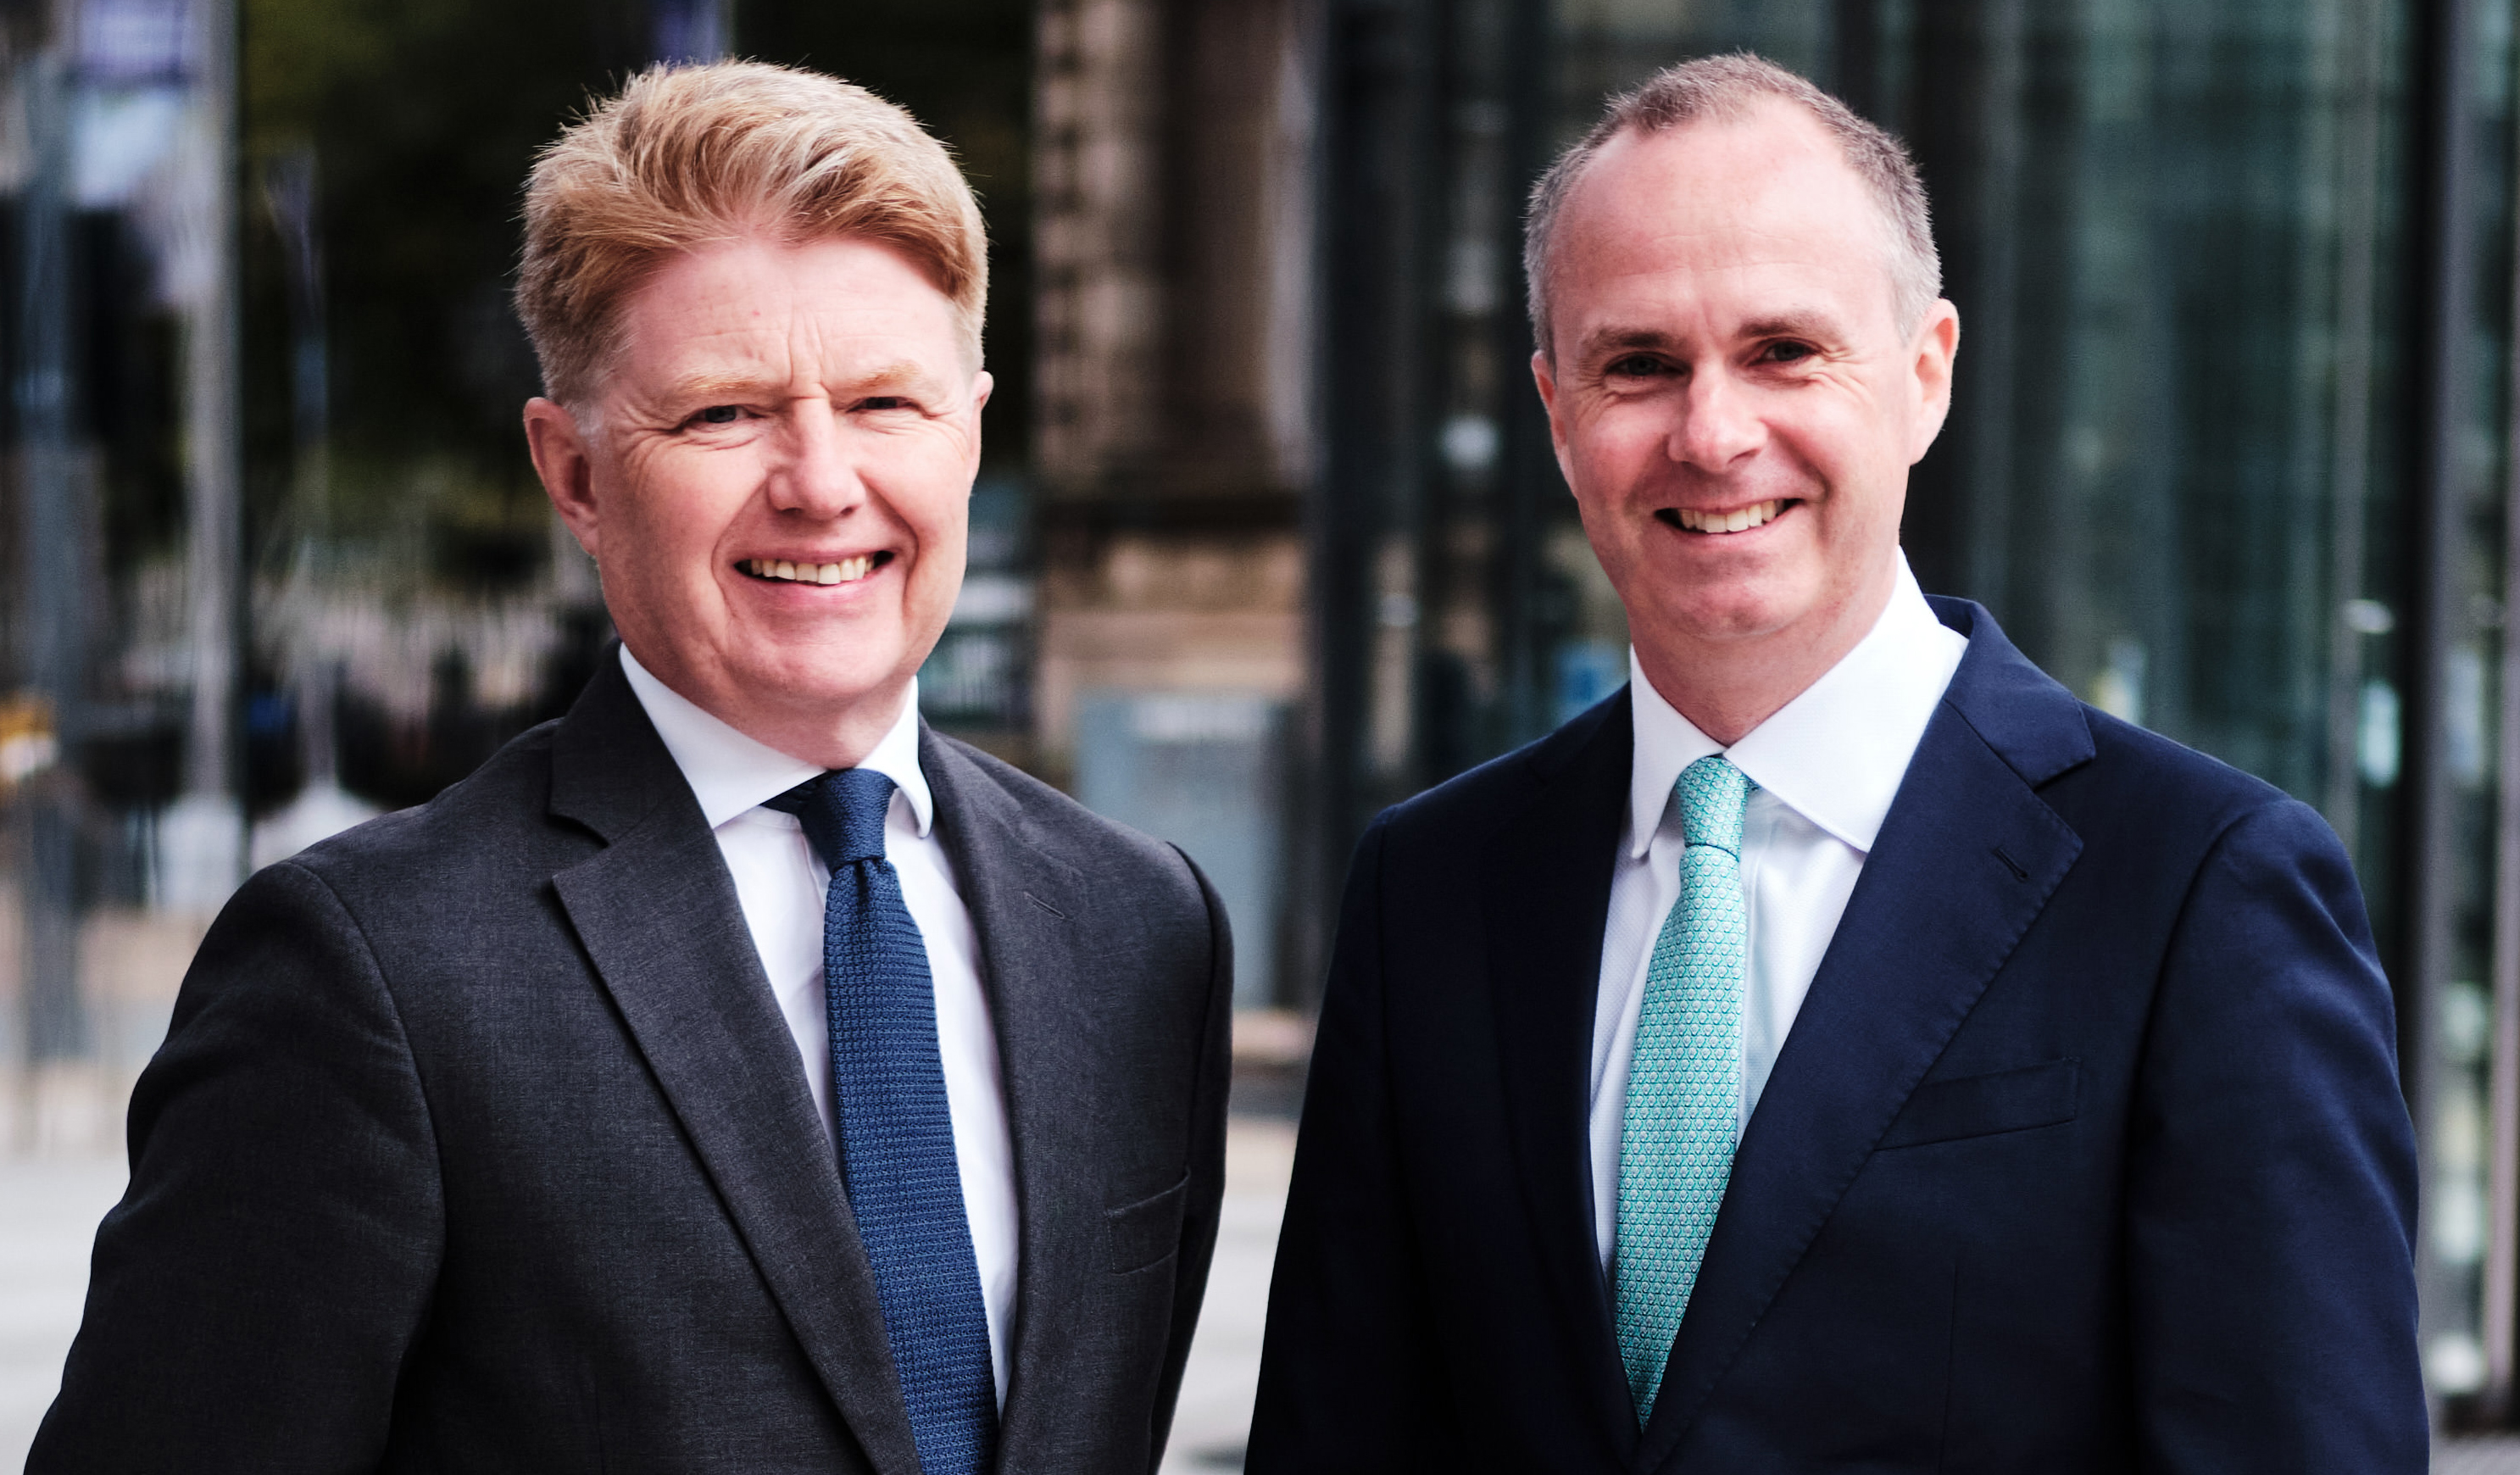 Press Release – Headpoint Strengthens Team With Appointment Of Emmet Keating As Partner